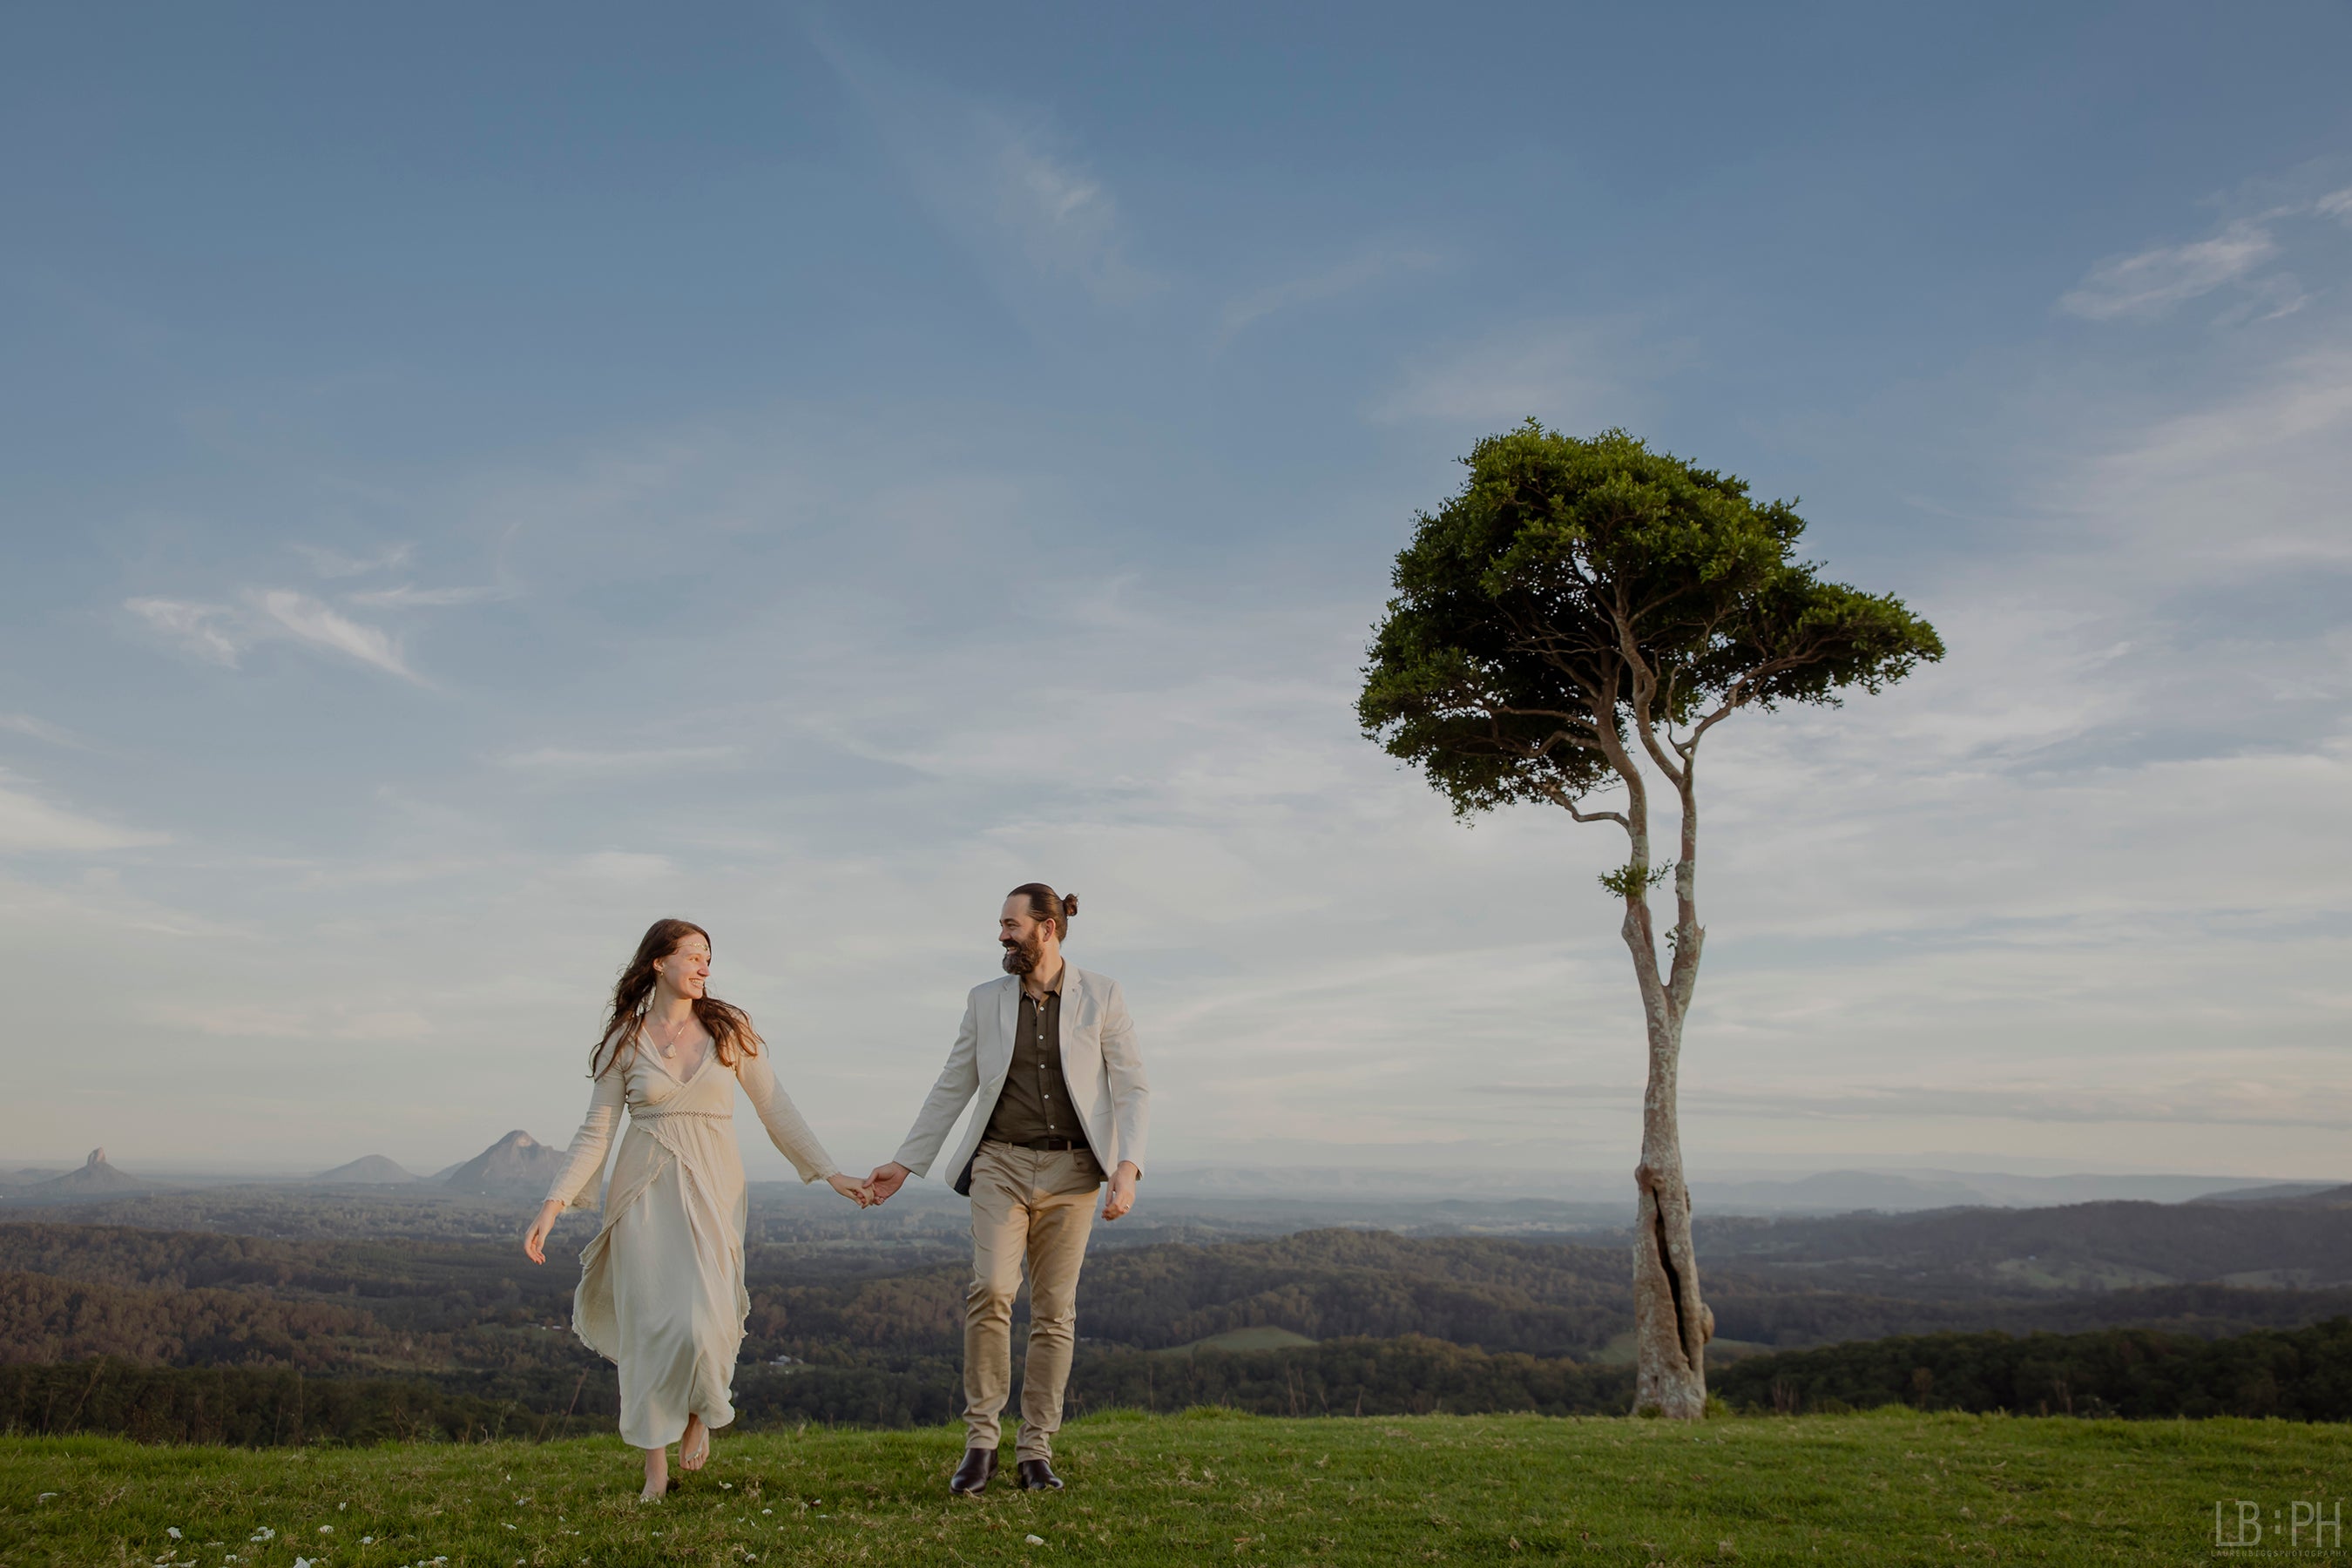 Eden Tree Eco - Co-Creators walking hand in hand against the backdrop of a beautiful tree overlooking a fantastical landscape.